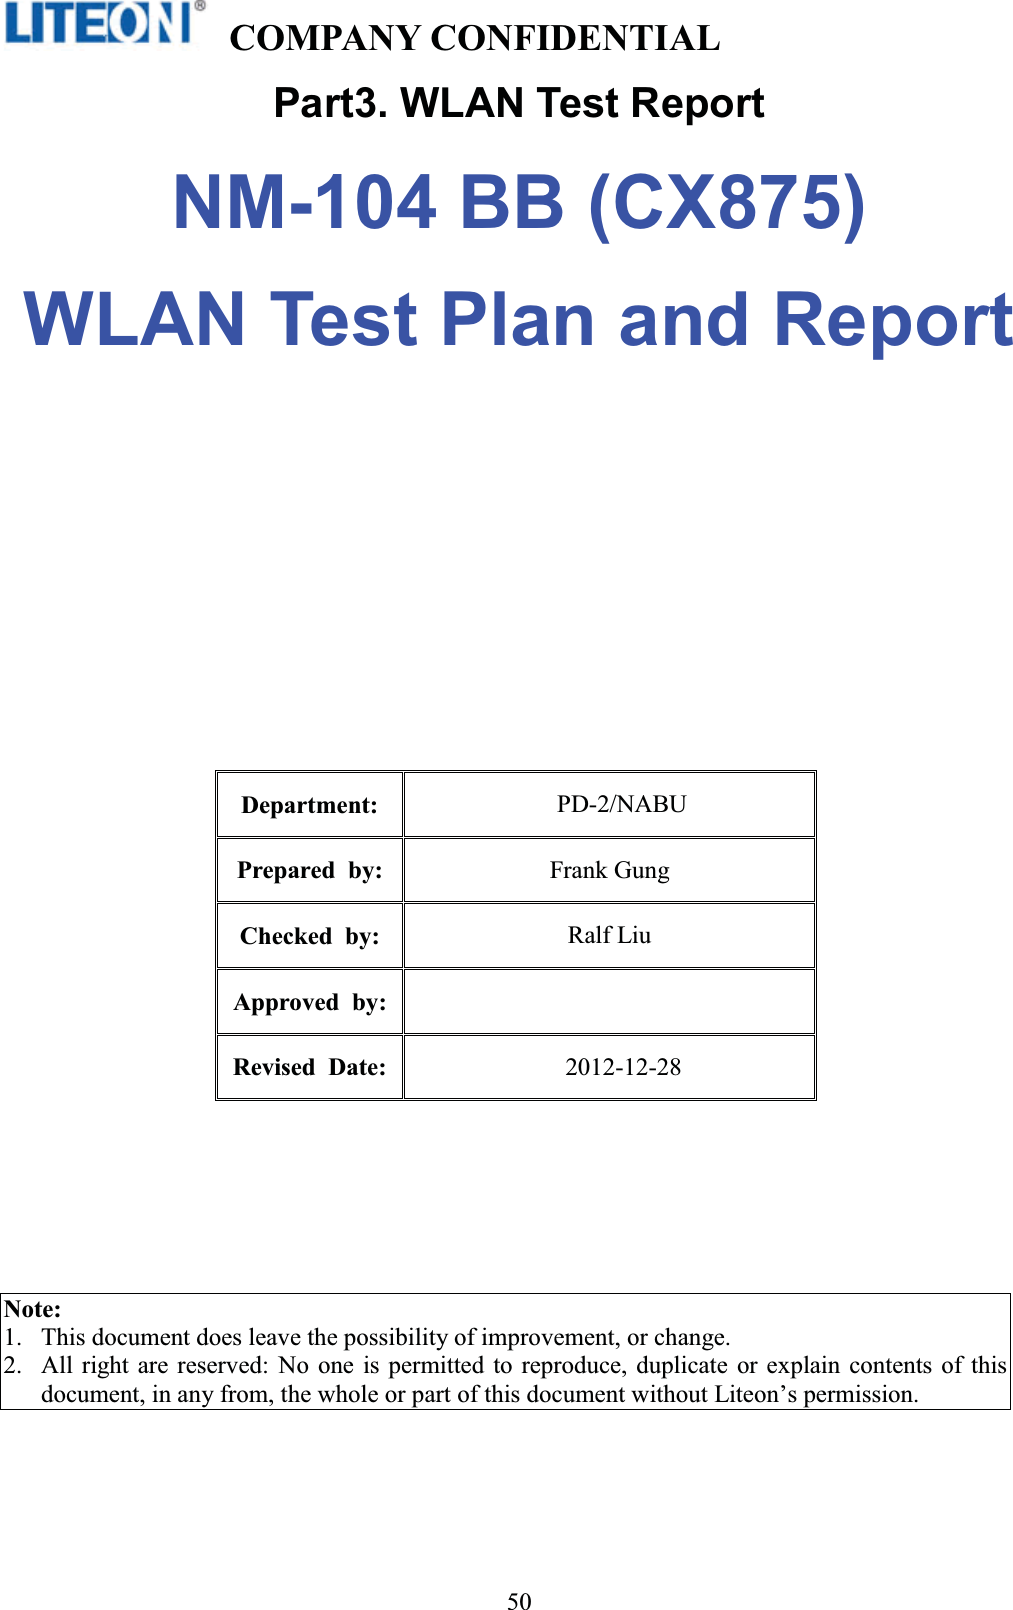   COMPANY CONFIDENTIAL   !50Part3. WLAN Test Report NM-104 BB (CX875) WLAN Test Plan and Report Department:  PD-2/NABU Prepared by:  Frank Gung Checked by:  Ralf Liu Approved by:Revised Date: 2012-12-28 Note:  1.This document does leave the possibility of improvement, or change. 2.All right are reserved: No one is permitted to reproduce, duplicate or explain contents of this document, in any from, the whole or part of this document without Liteon’s permission. 